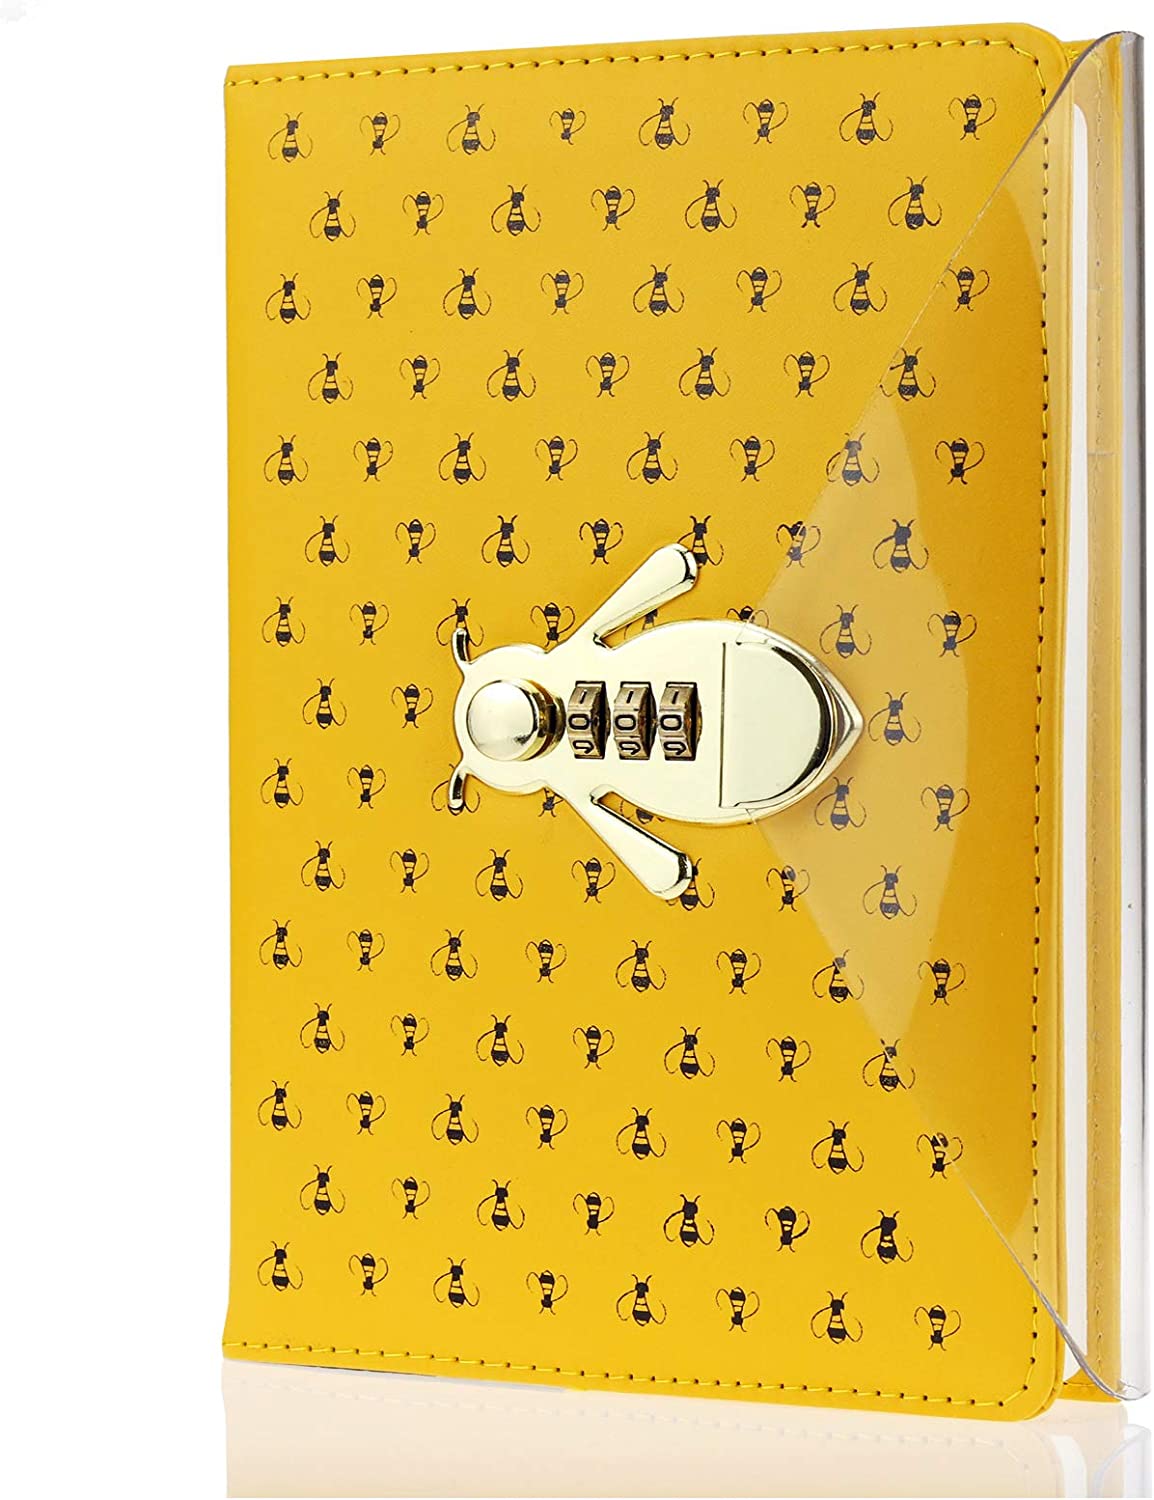 WEMATE Diary with Lock, A5 PU Leather, 240 Pages, Password